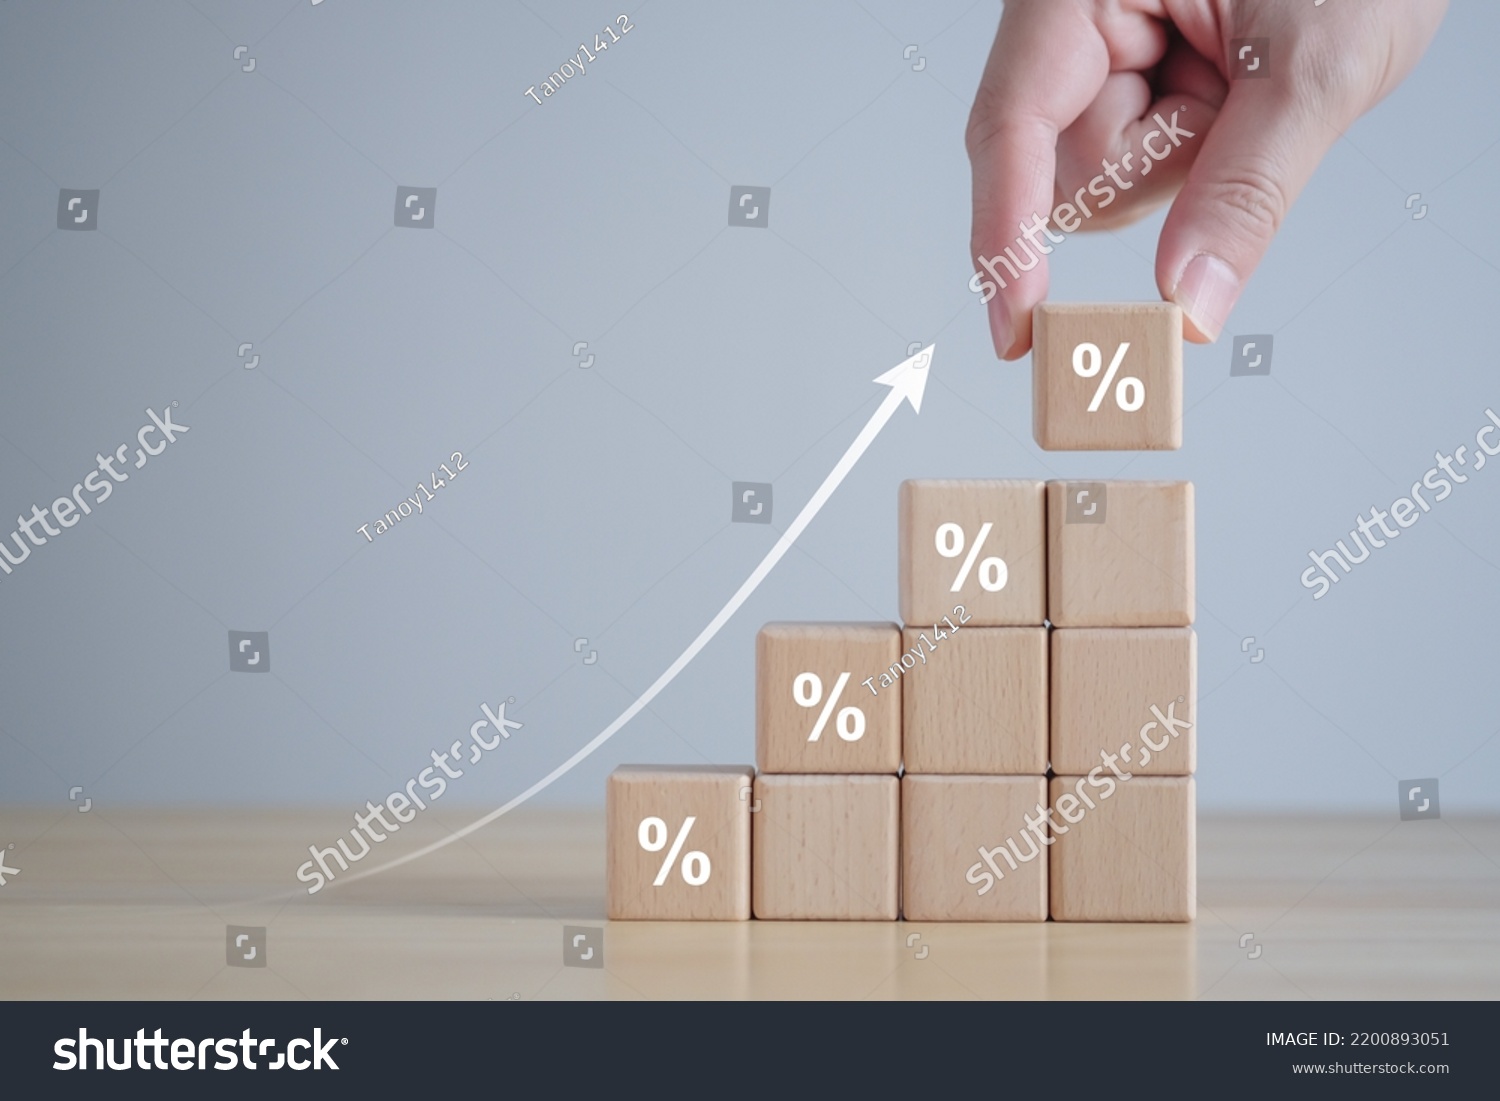 Interest rate finance and mortgage rates. hand holding wooden block with percentage sign and rise of arrow up, financial growth, interest rate increase, inflation, sale price and tax rise concept. #2200893051